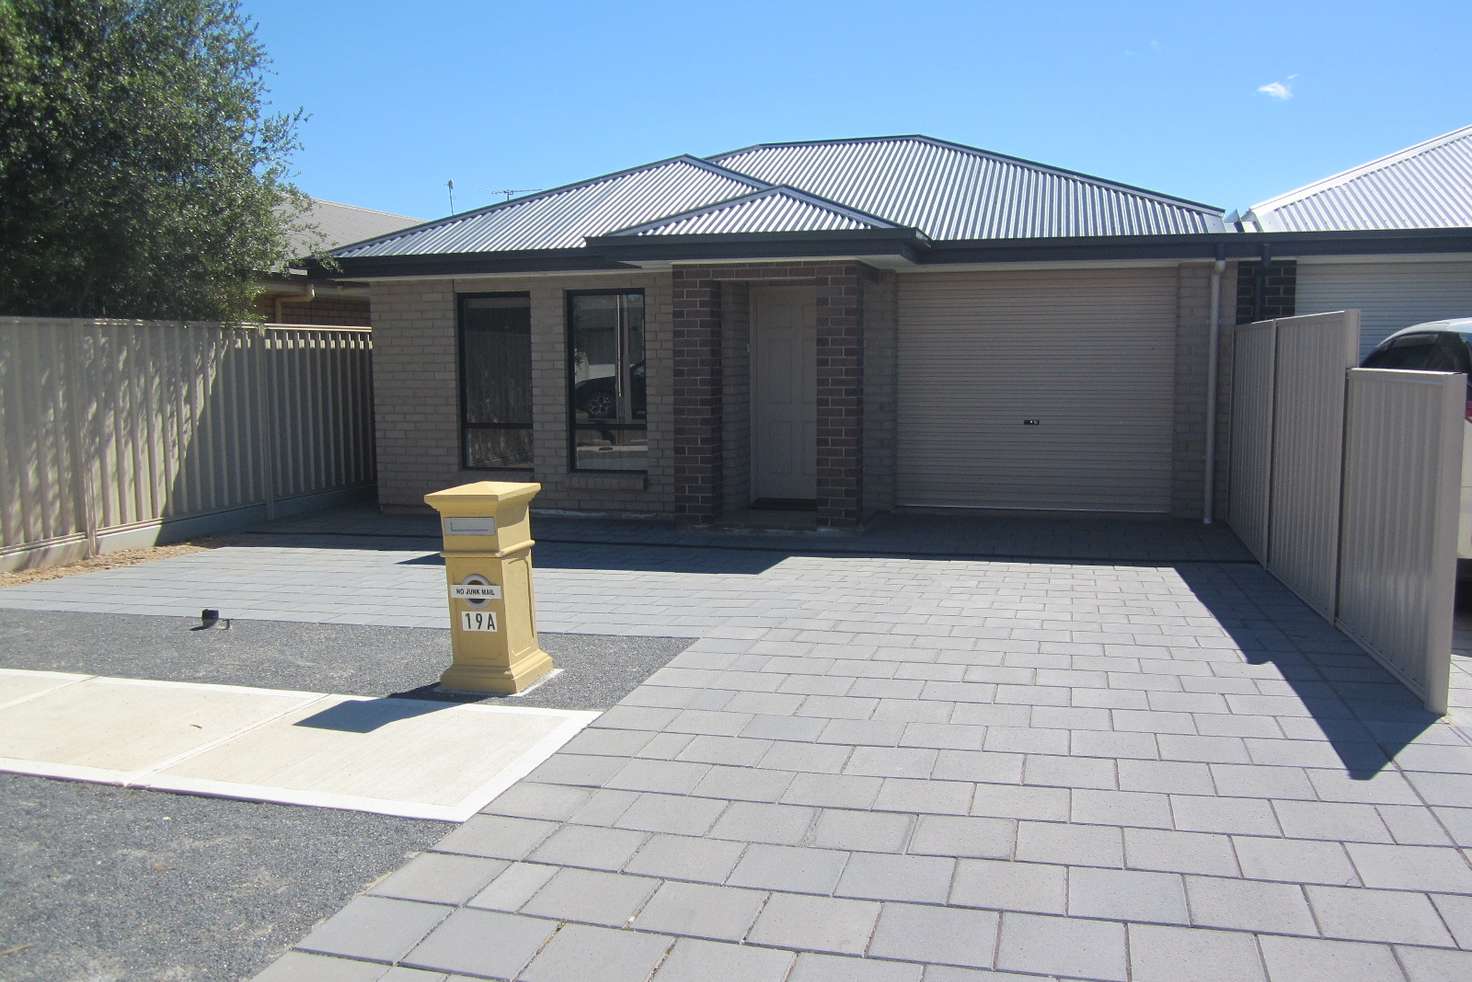 Main view of Homely house listing, 19A Scott Ave, Clovelly Park SA 5042